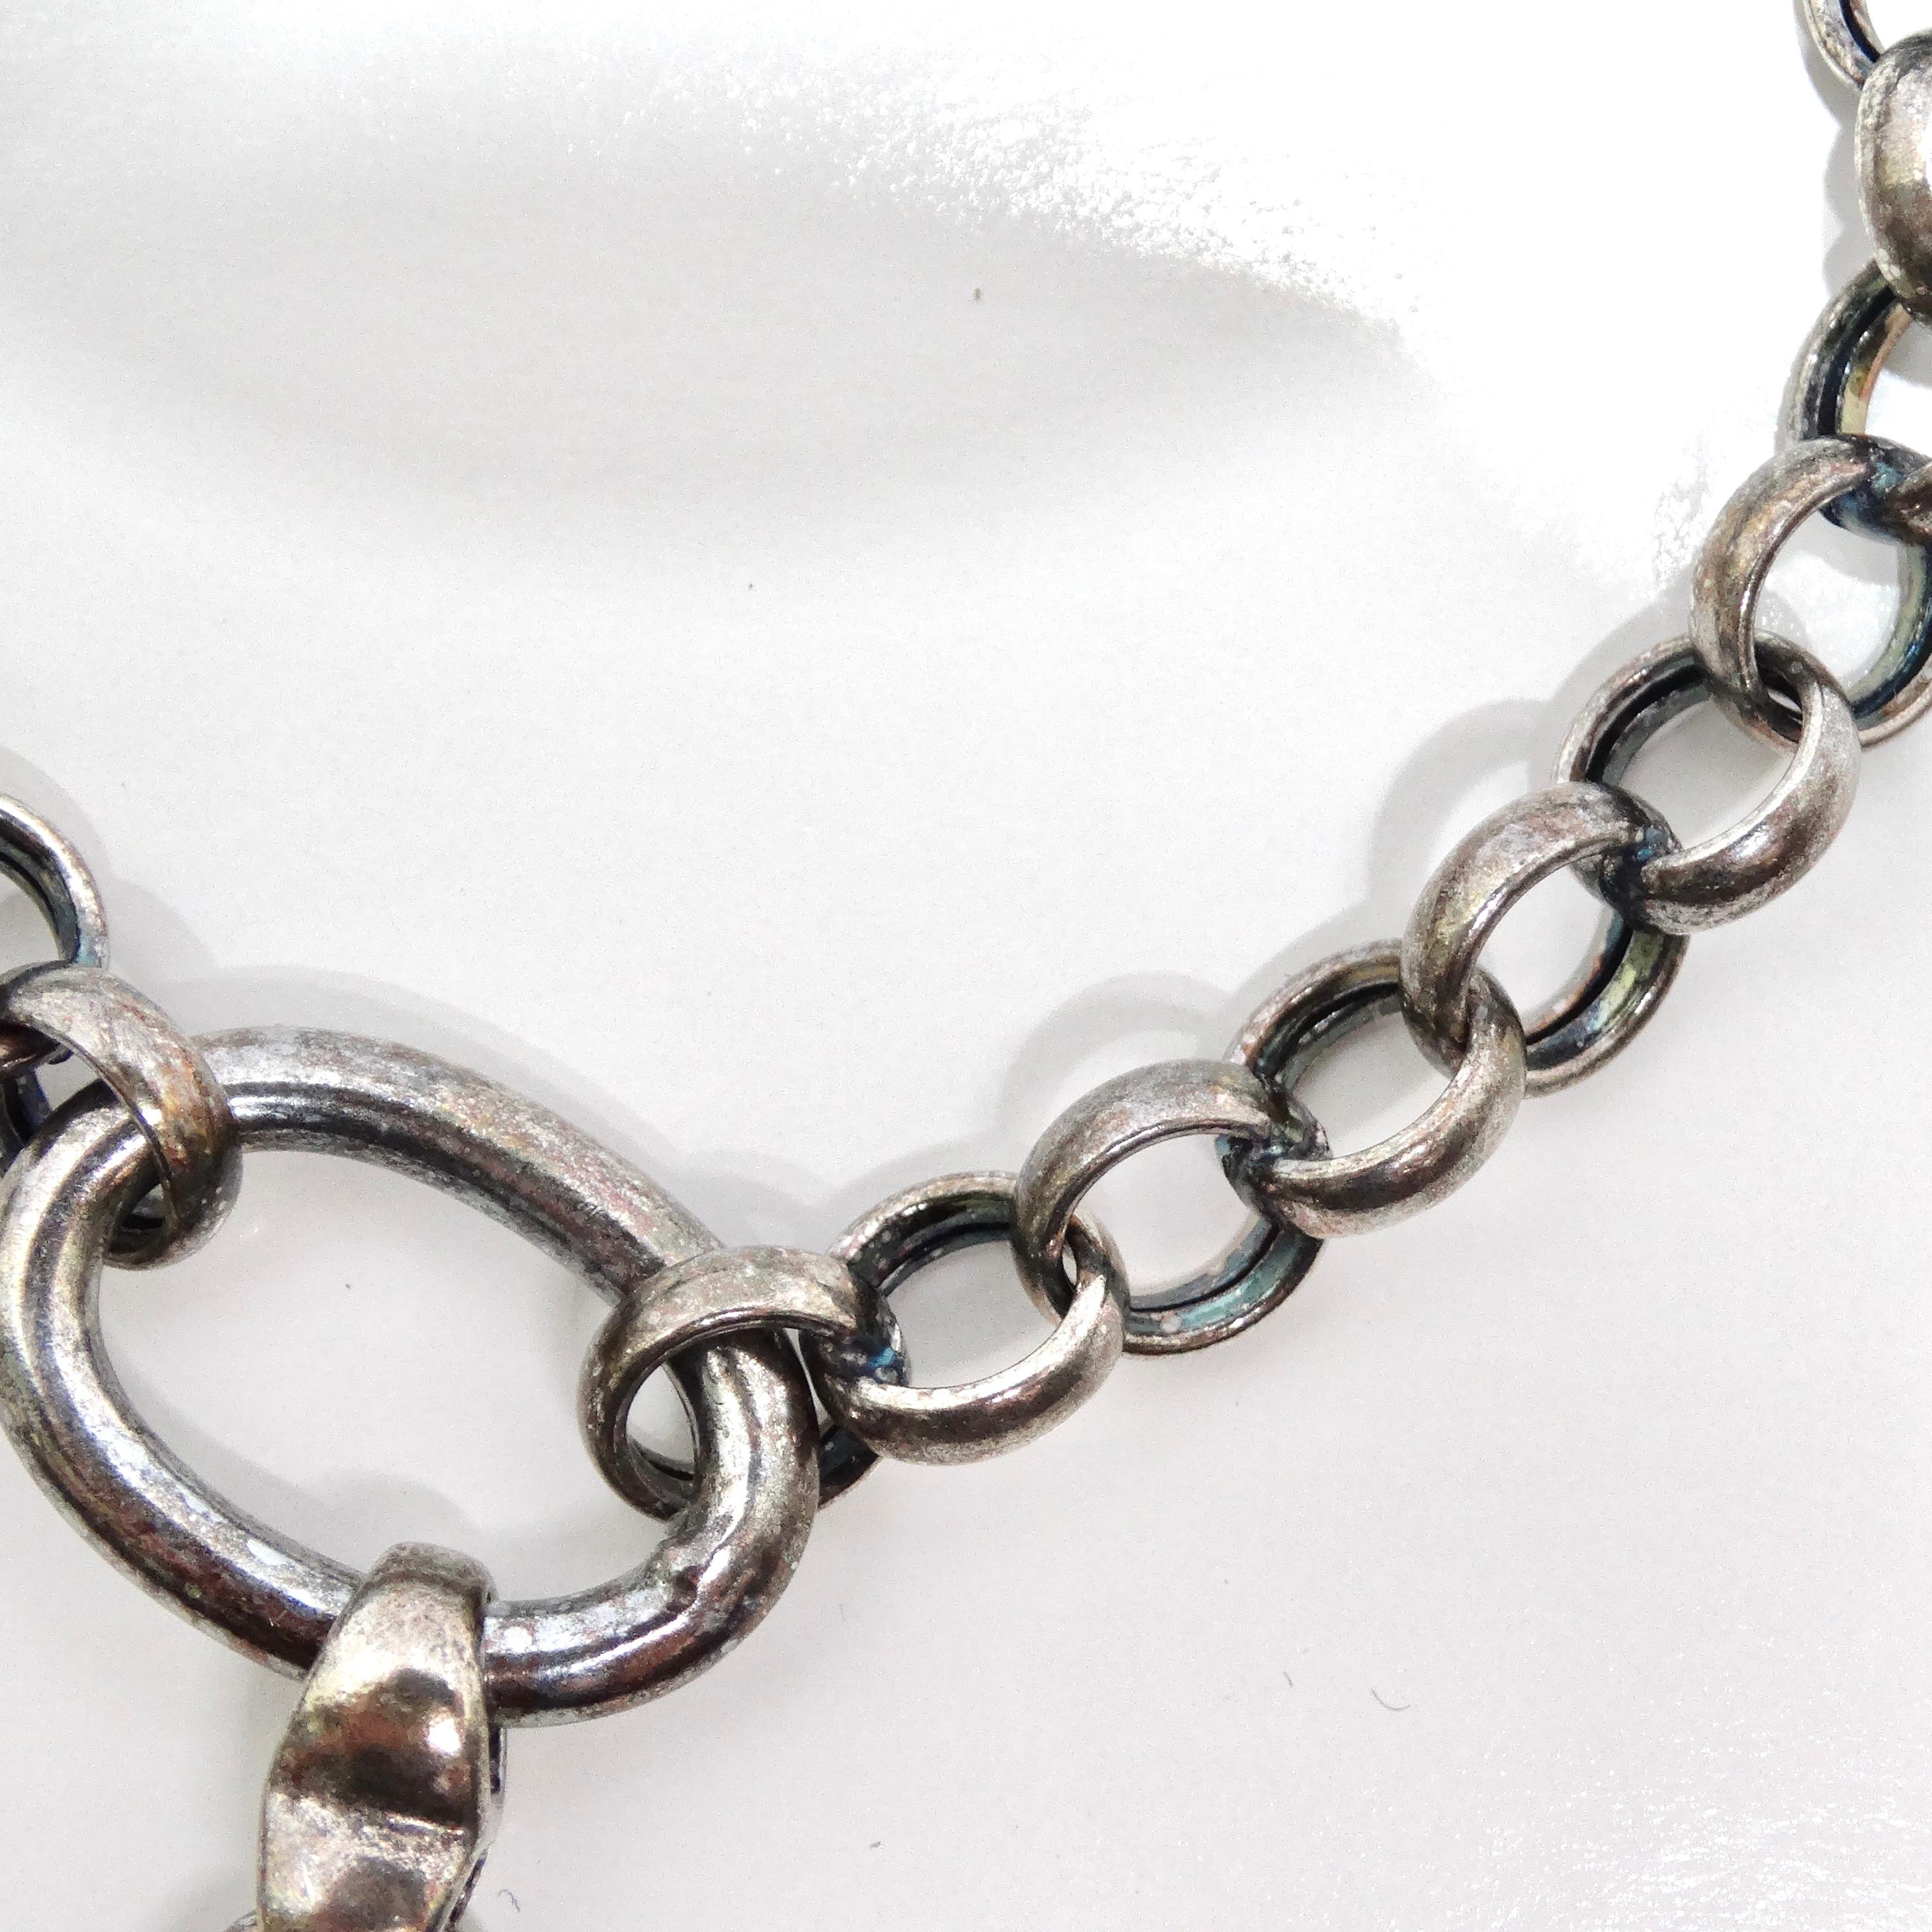 1970s Solid Silver Heart Charm Bracelet In Good Condition For Sale In Scottsdale, AZ